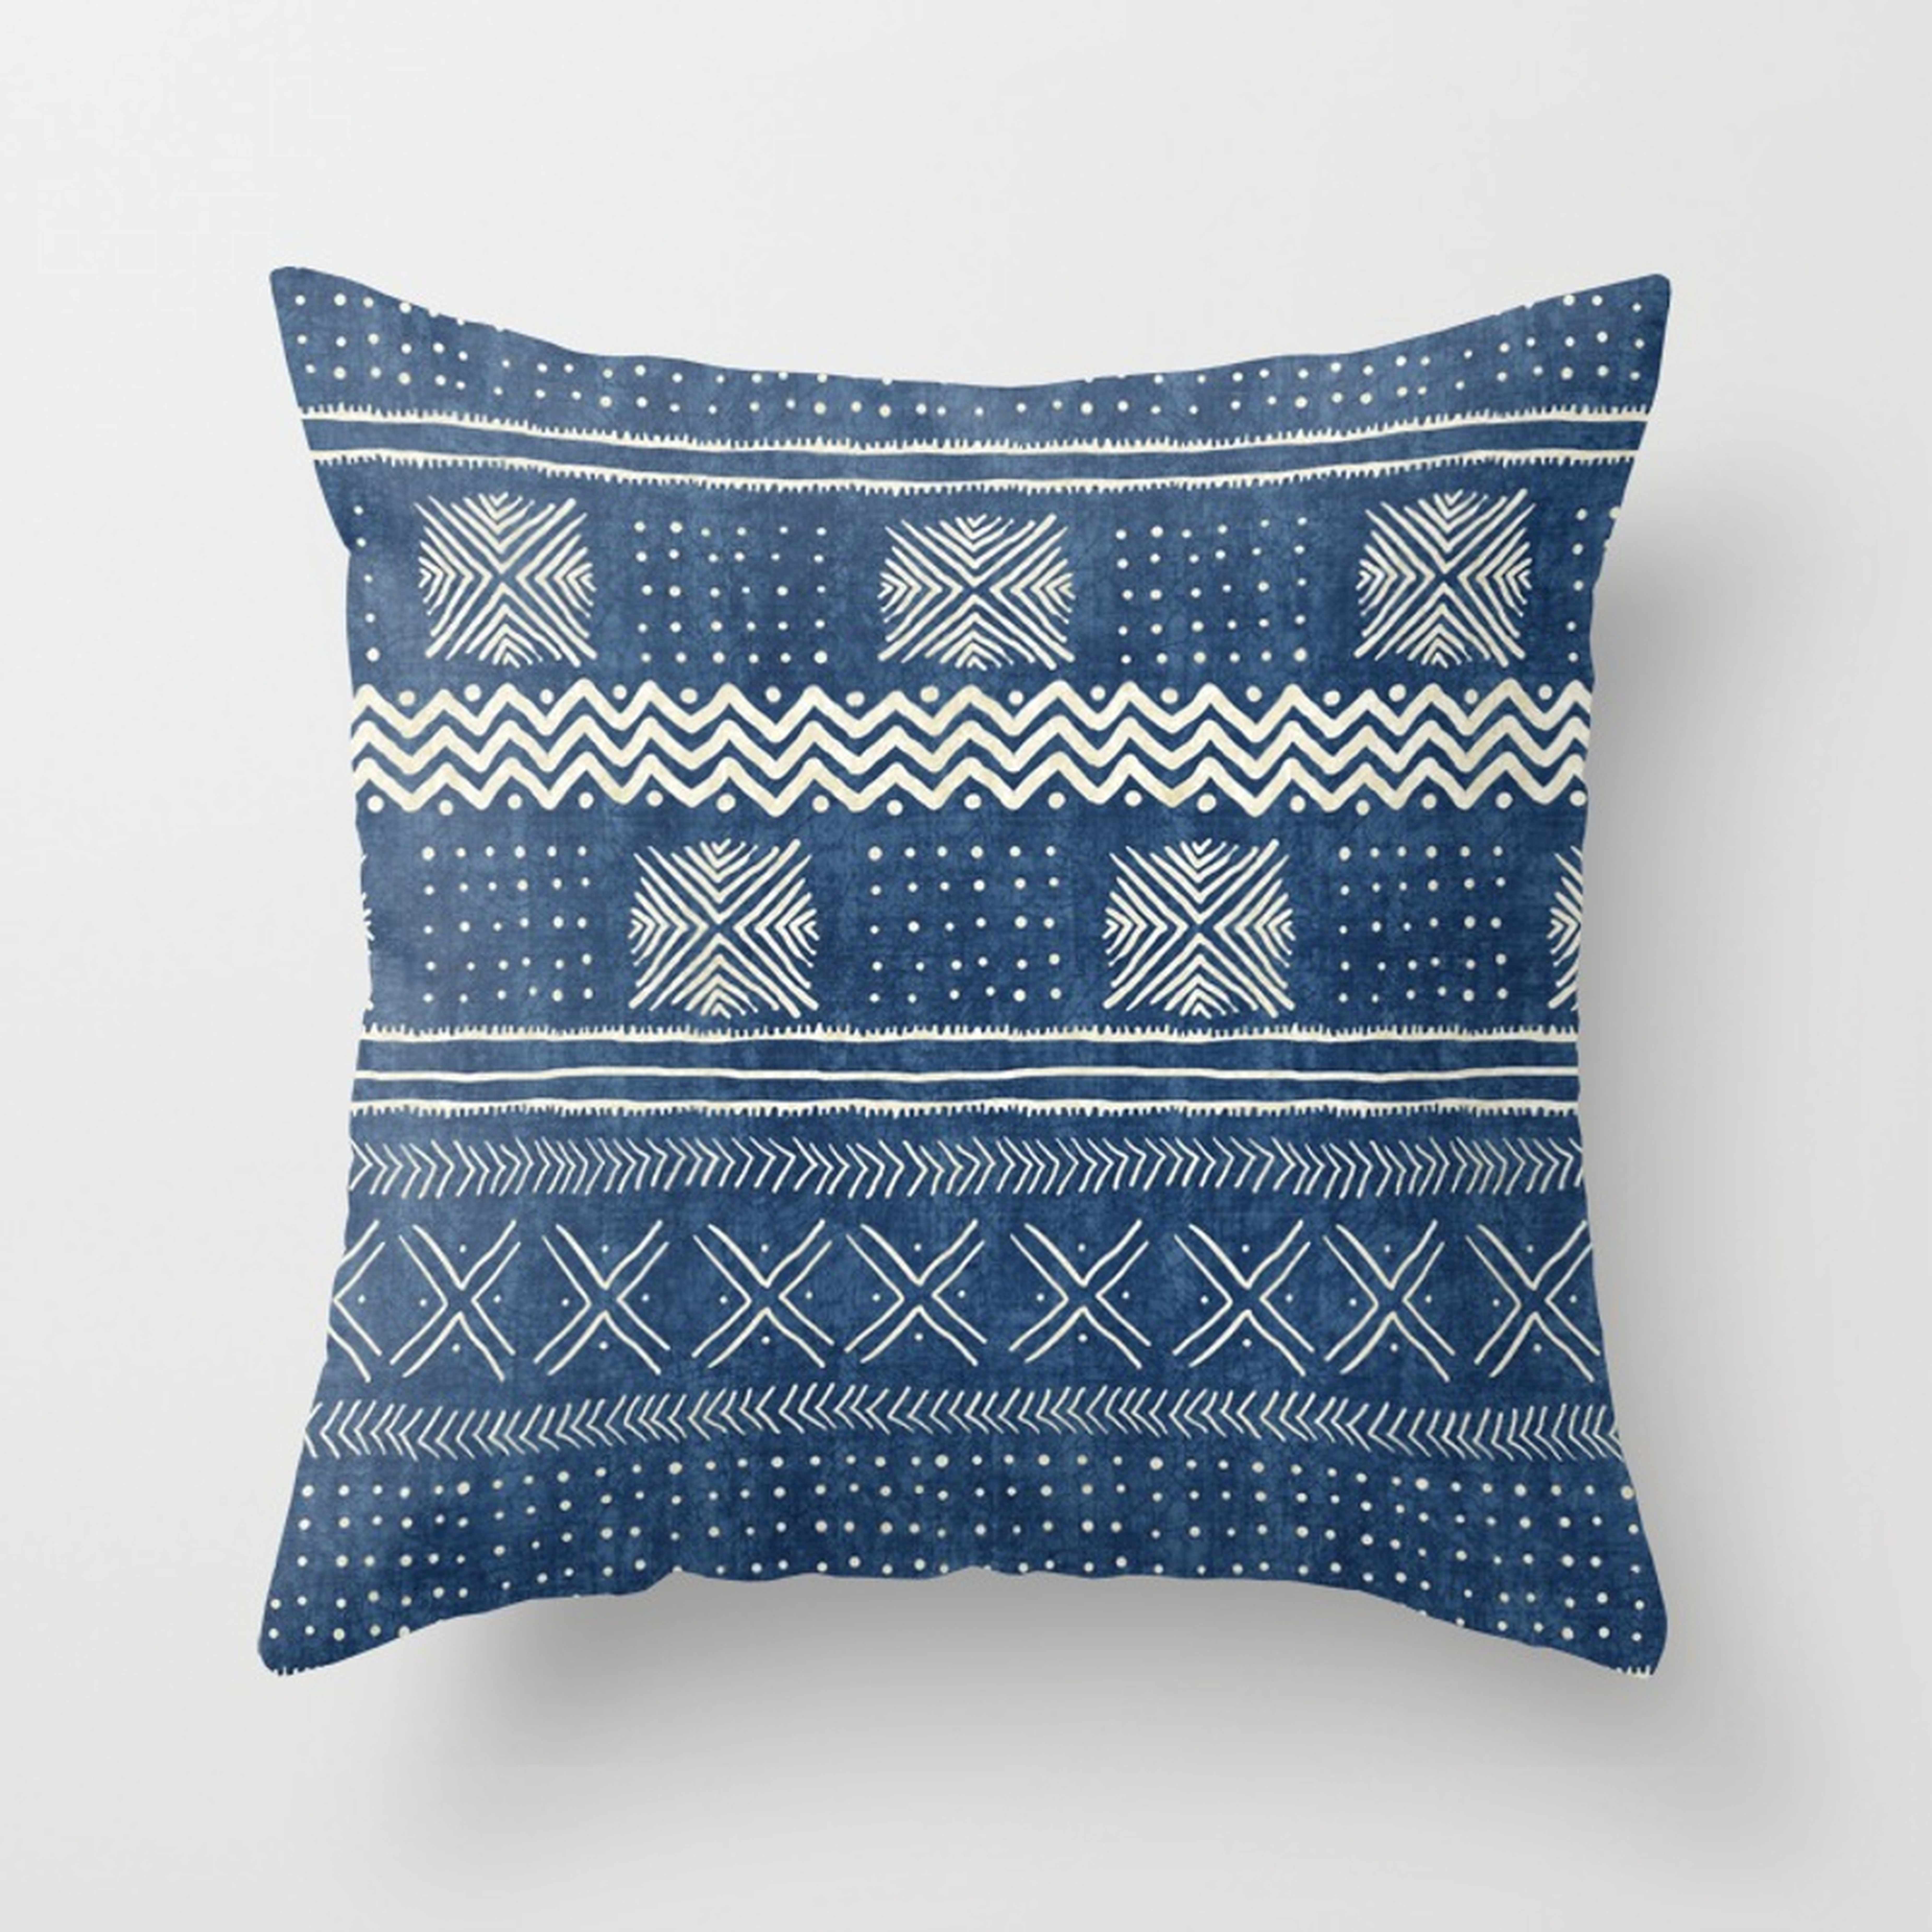 Geometric Stripe Blue Throw Pillow by House Of Haha - Cover (24" x 24") With Pillow Insert - Indoor Pillow - Society6